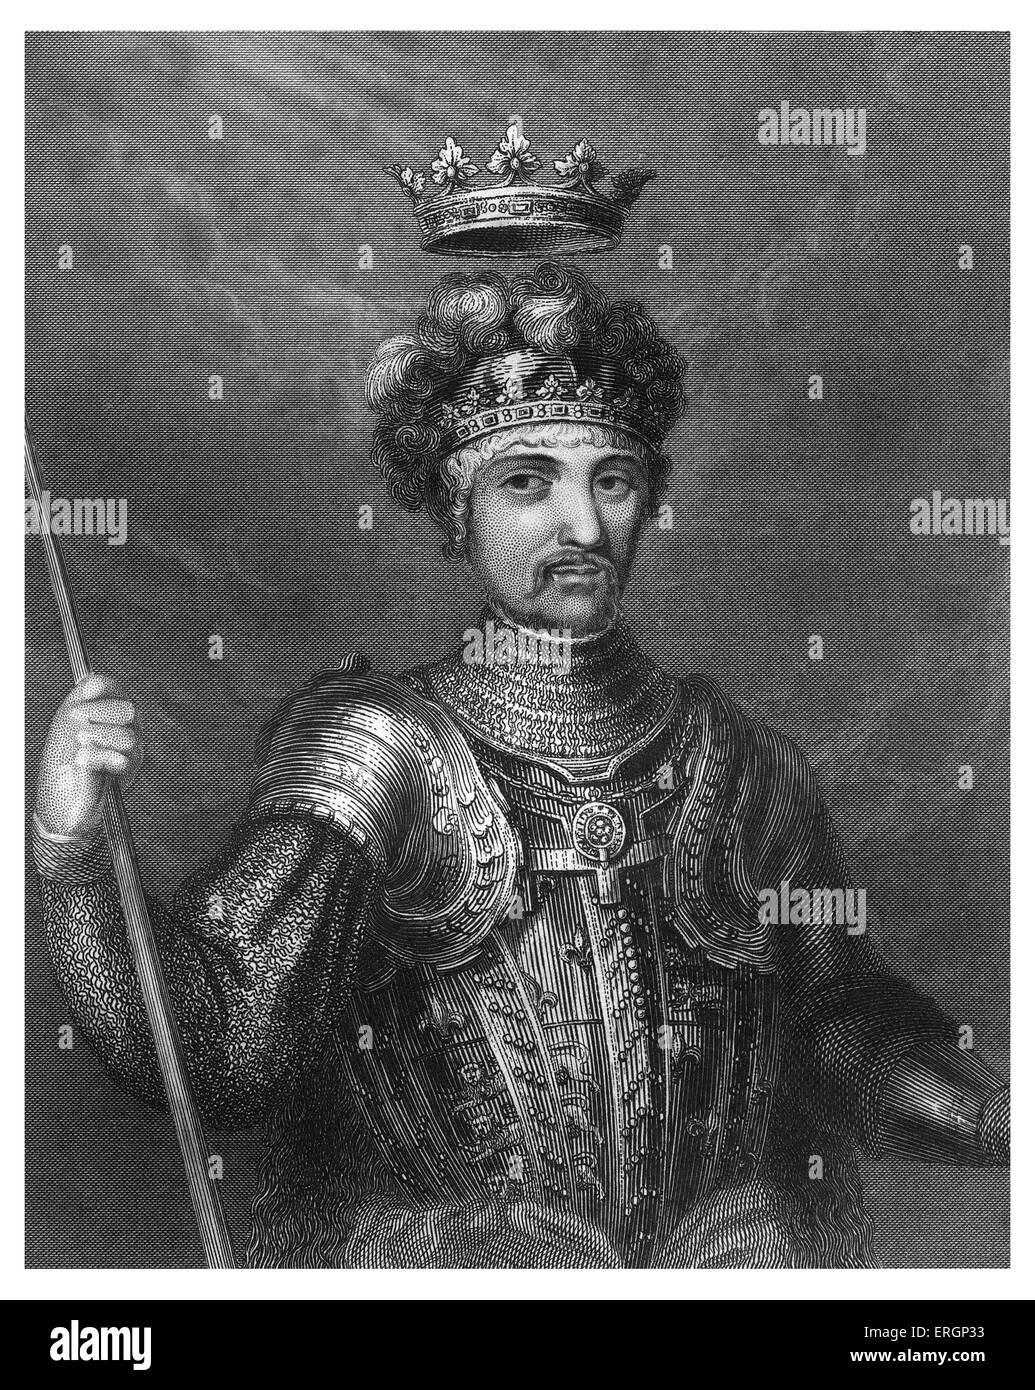 Edward The Black Prince, eldest son of King Edward III of England. Edward died one year before his father, becoming the first Stock Photo